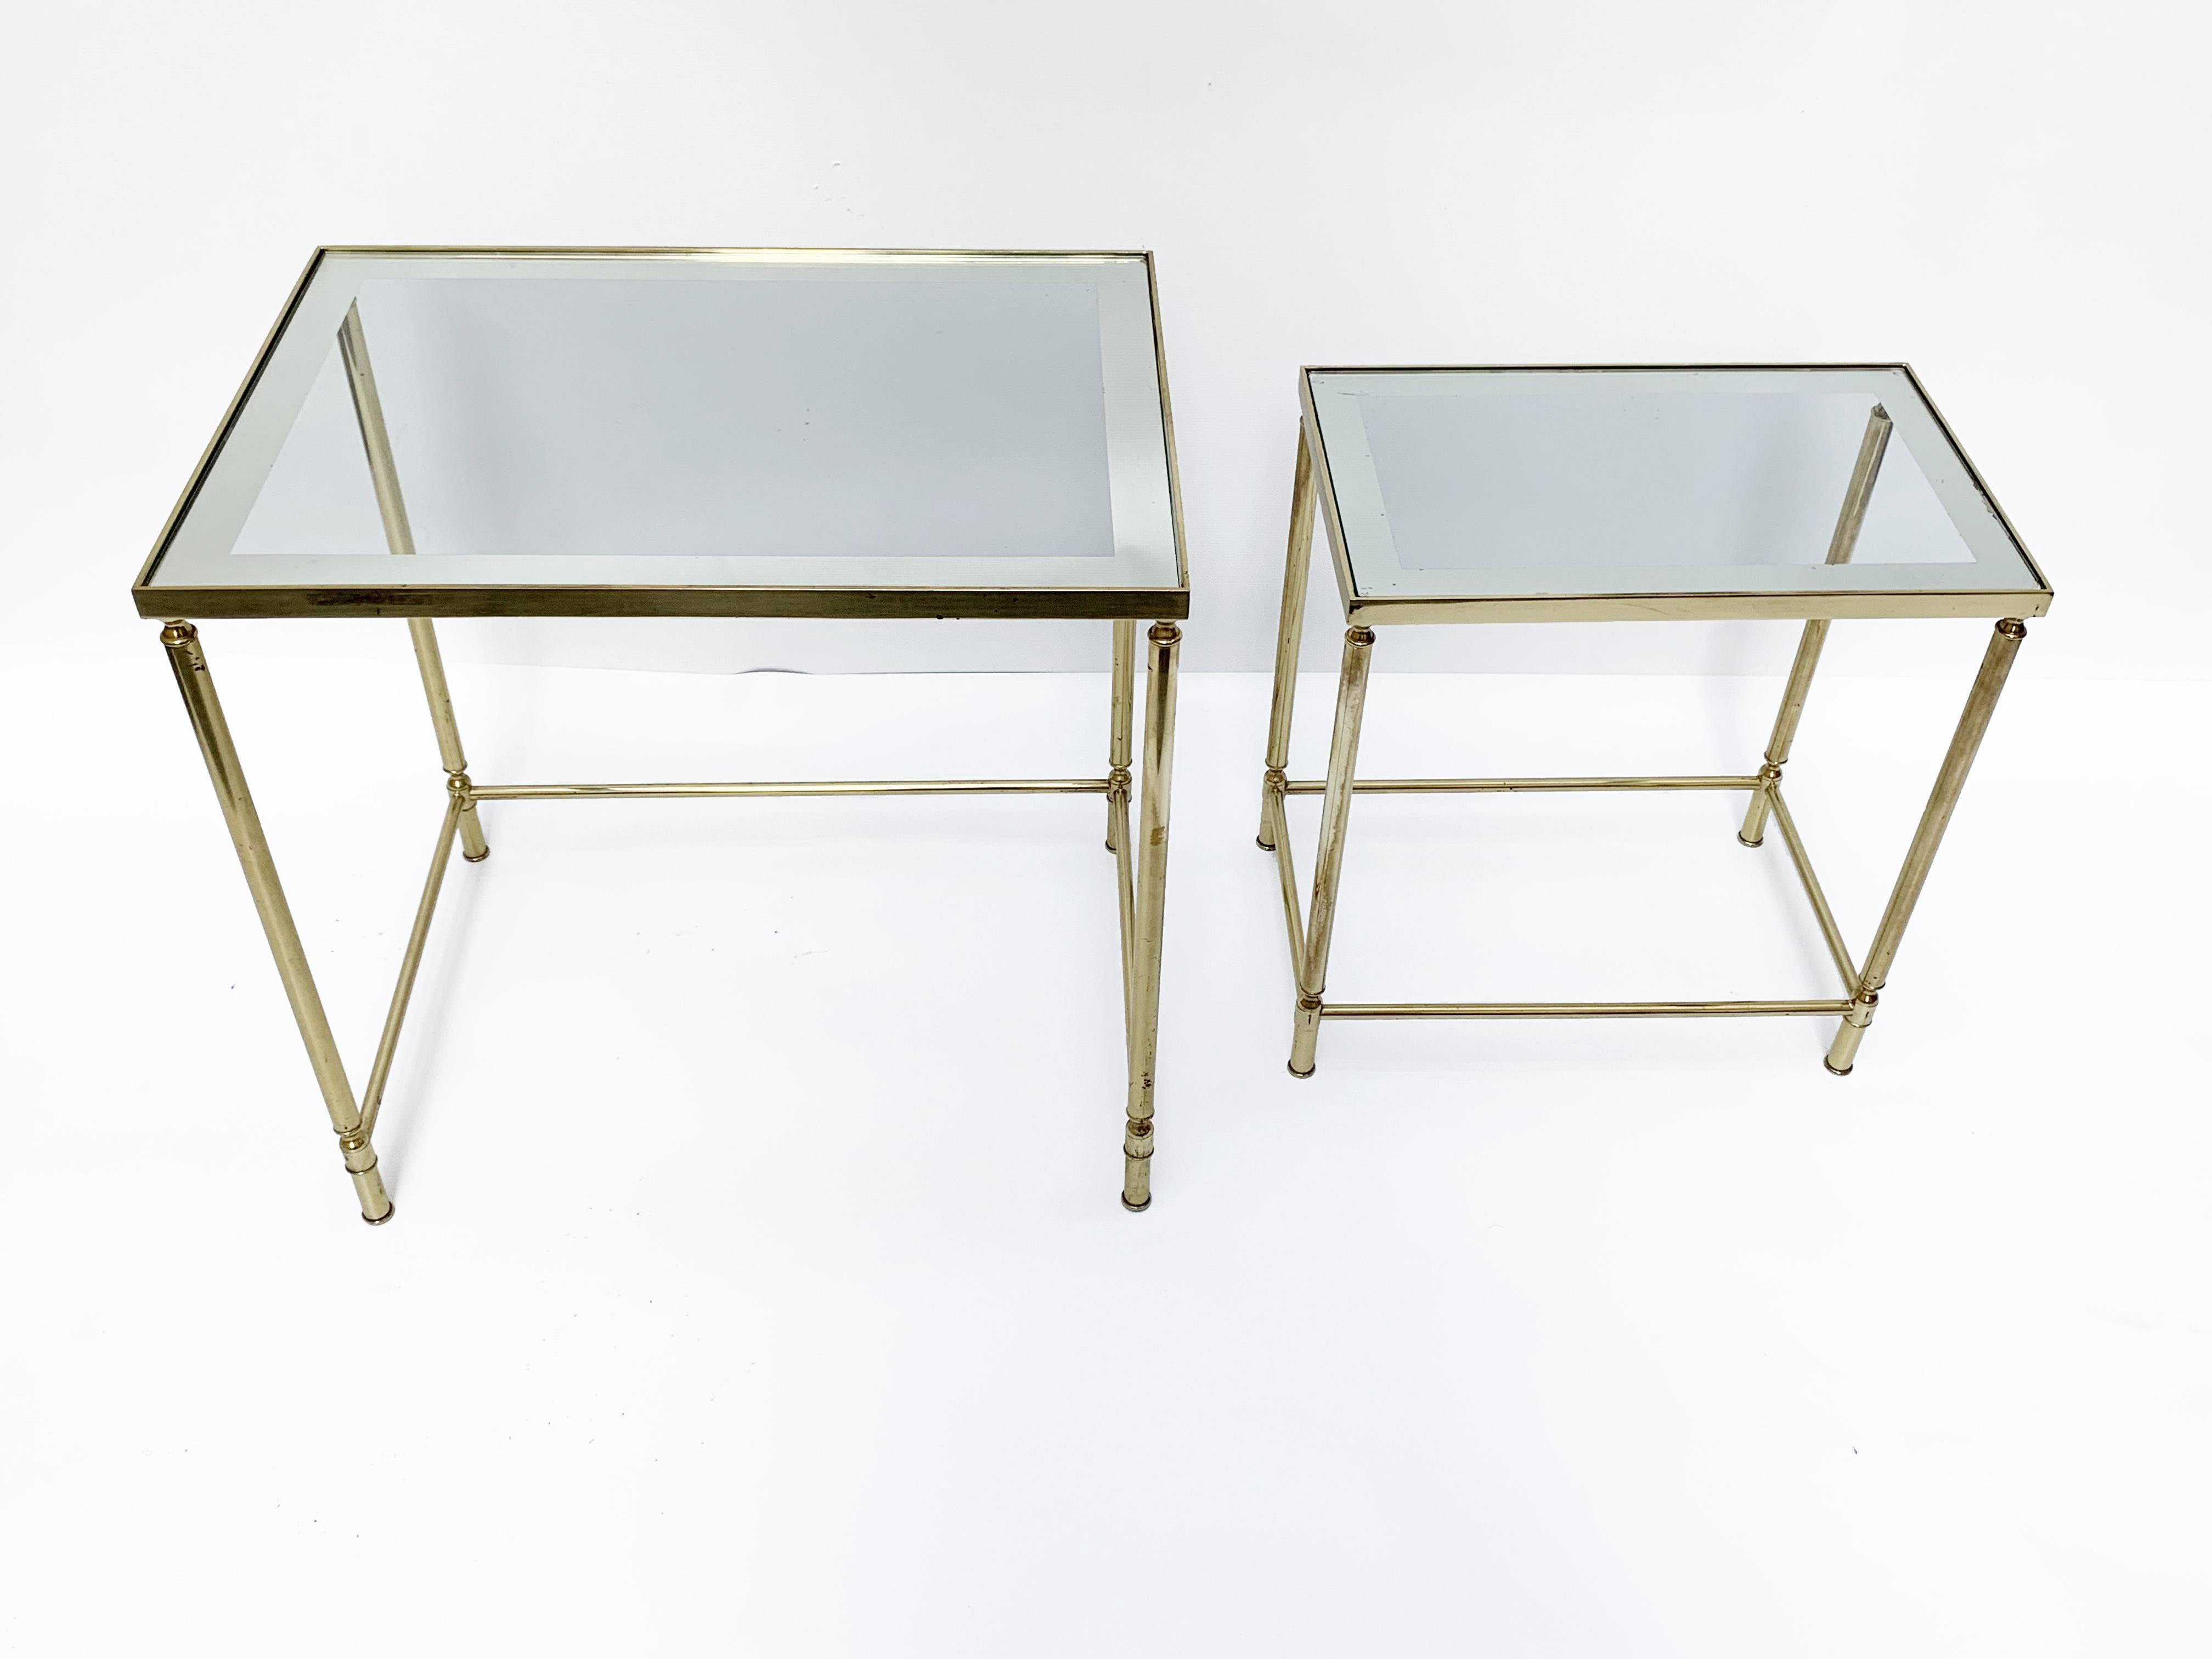 French Nesting Tables in Brass and Mirrored Glass by Maison Jansen, France, 1970s